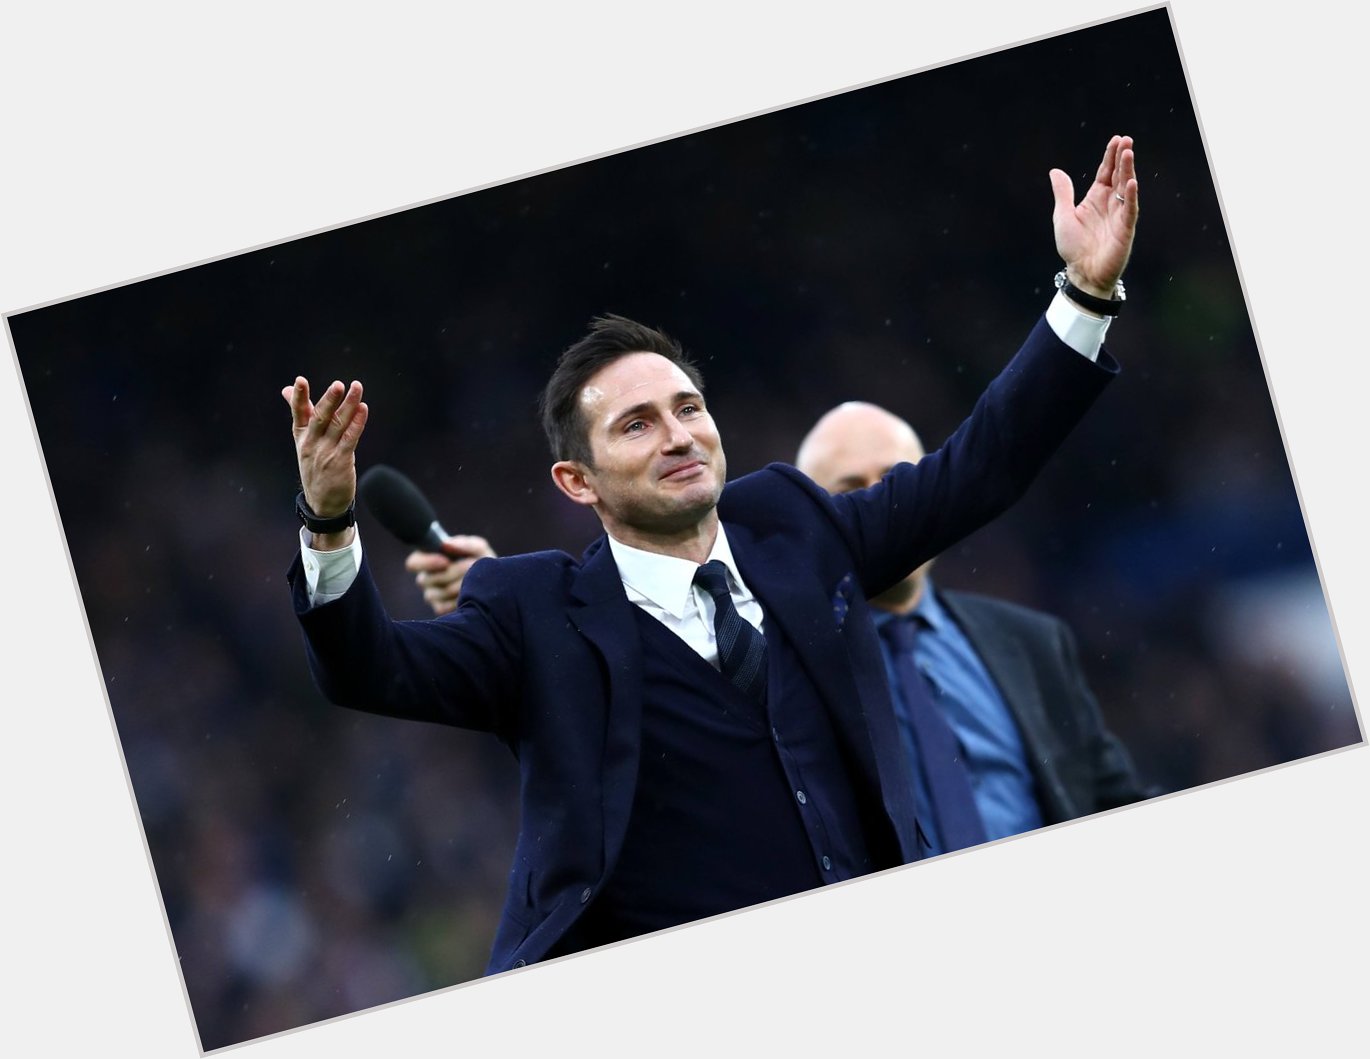 Happy birthday Super Frankie! Chelsea legend & Derby county manager, Frank Lampard turns 40 today! 